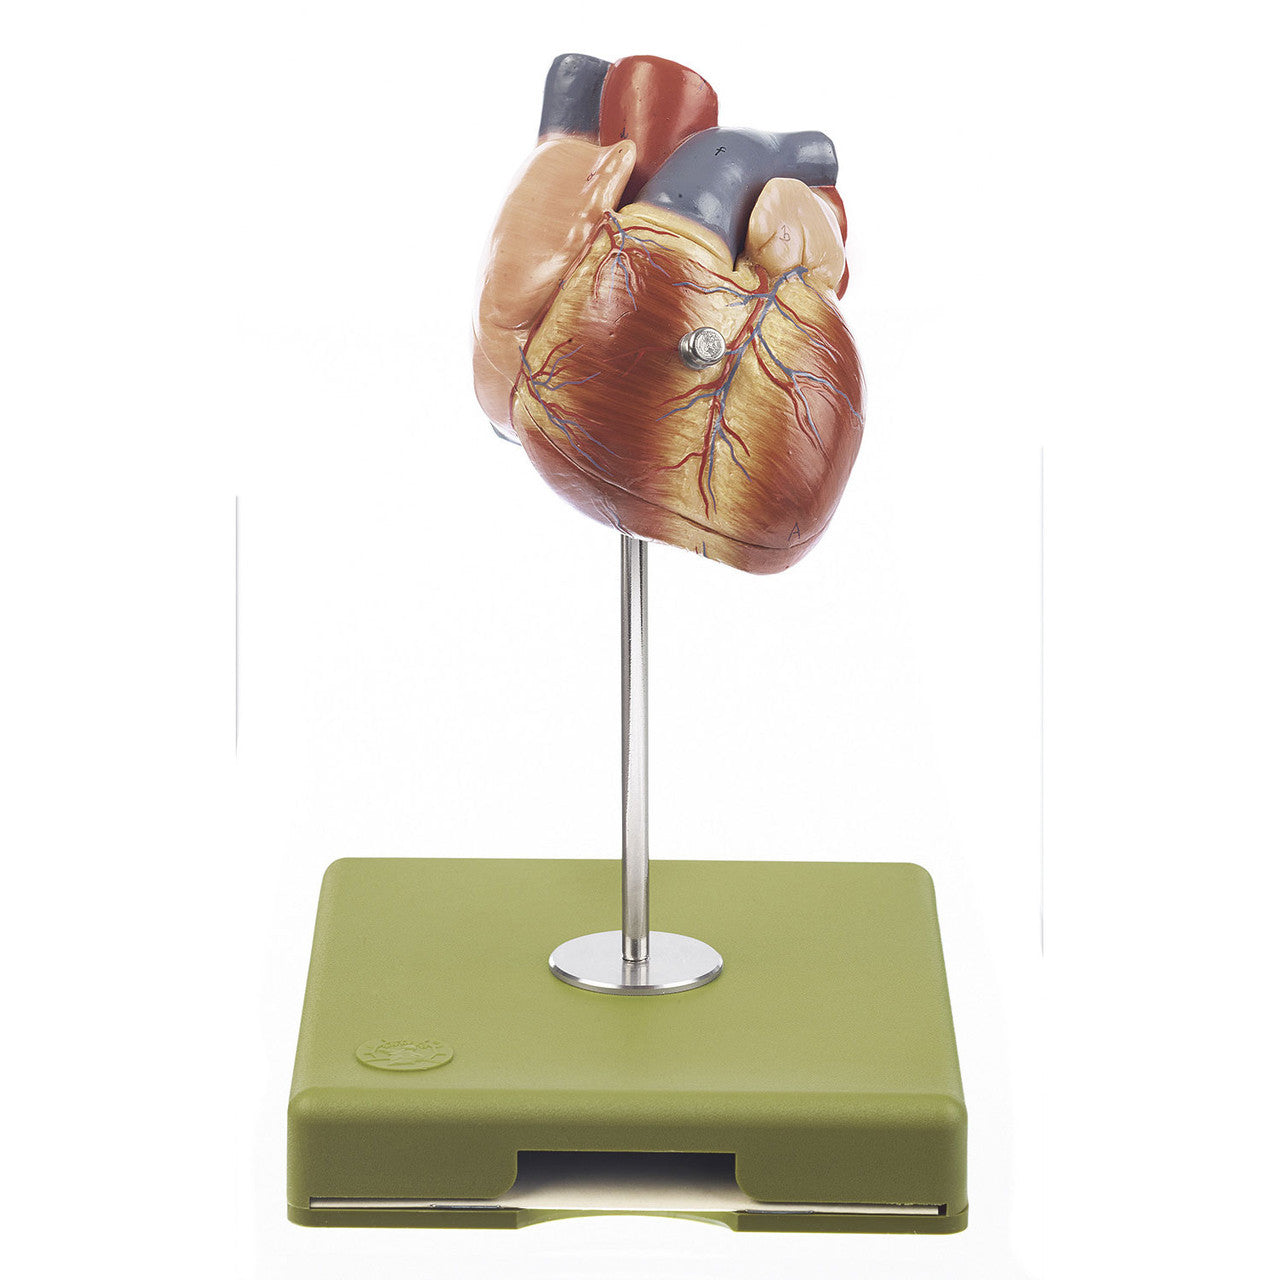 Heart Model, 2 parts on stand Somso Hs 3